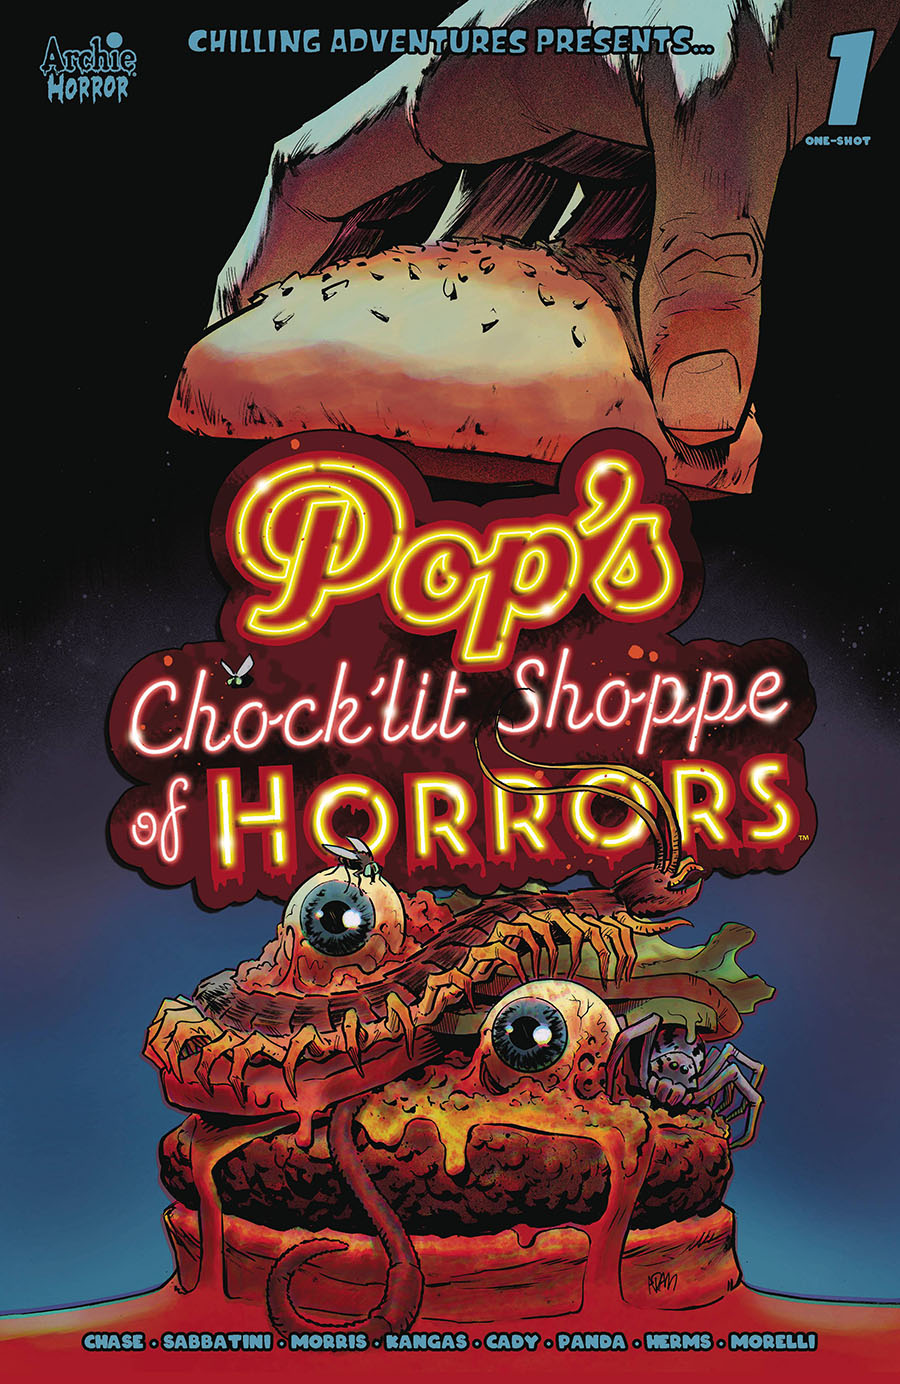 Chilling Adventures Presents Pops Chocklit Shoppe Of Horrors #1 (One Shot) Cover A Regular Adam Gorham Cover